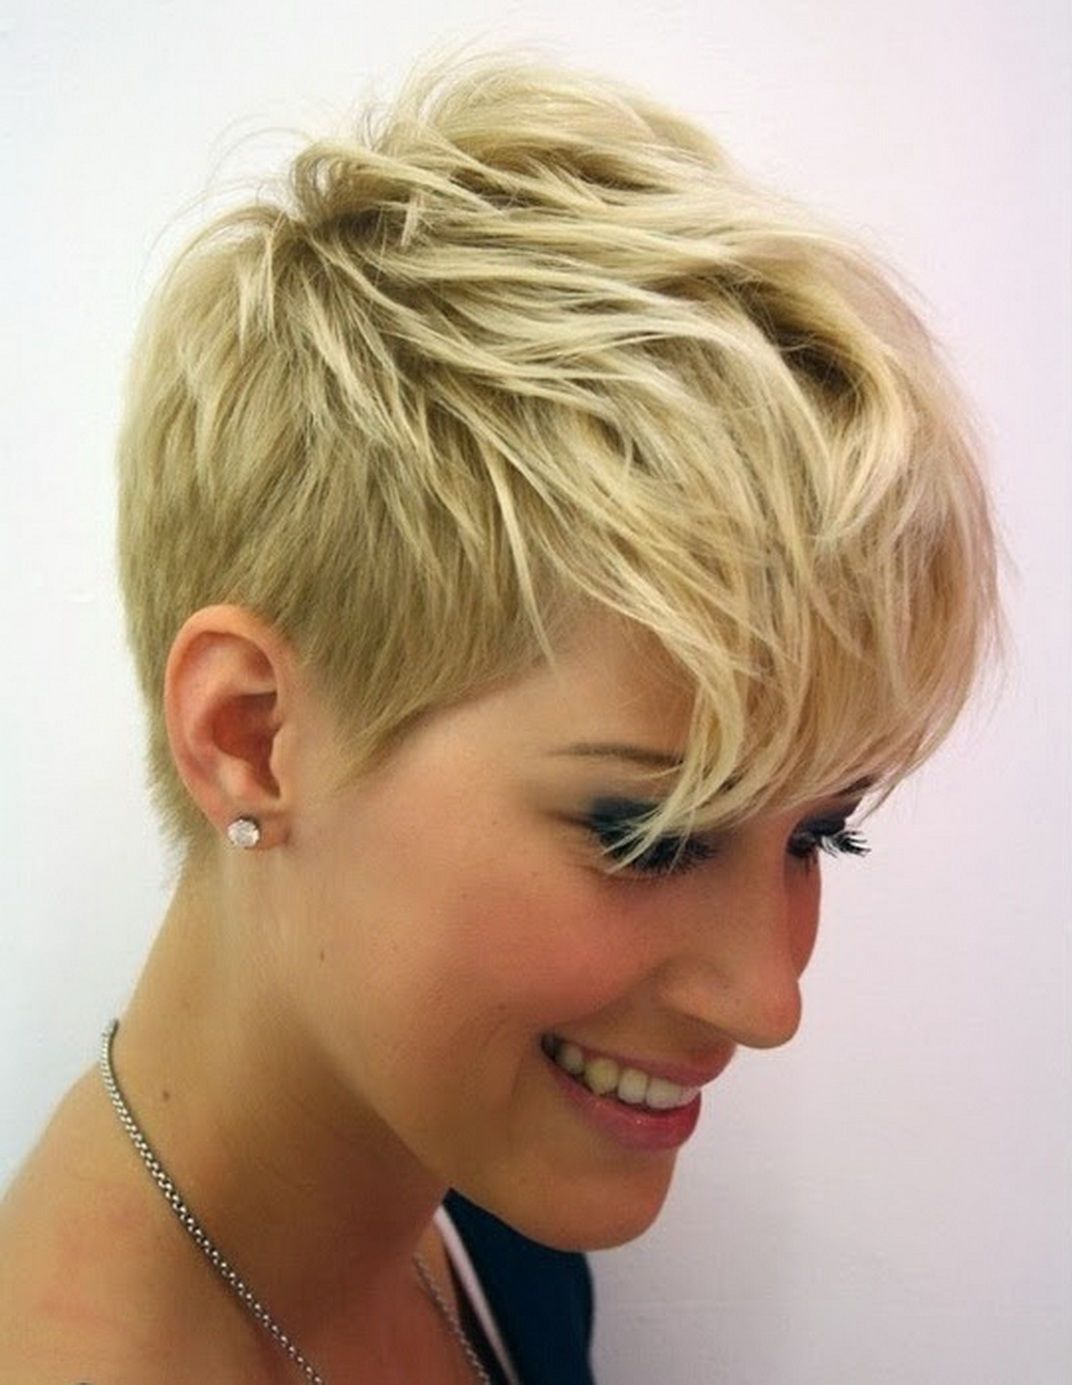 24 Cool Looking Short Hairstyles For Summer | Styles Weekly Within 2018 Unique Pixie Hairstyles (View 10 of 15)